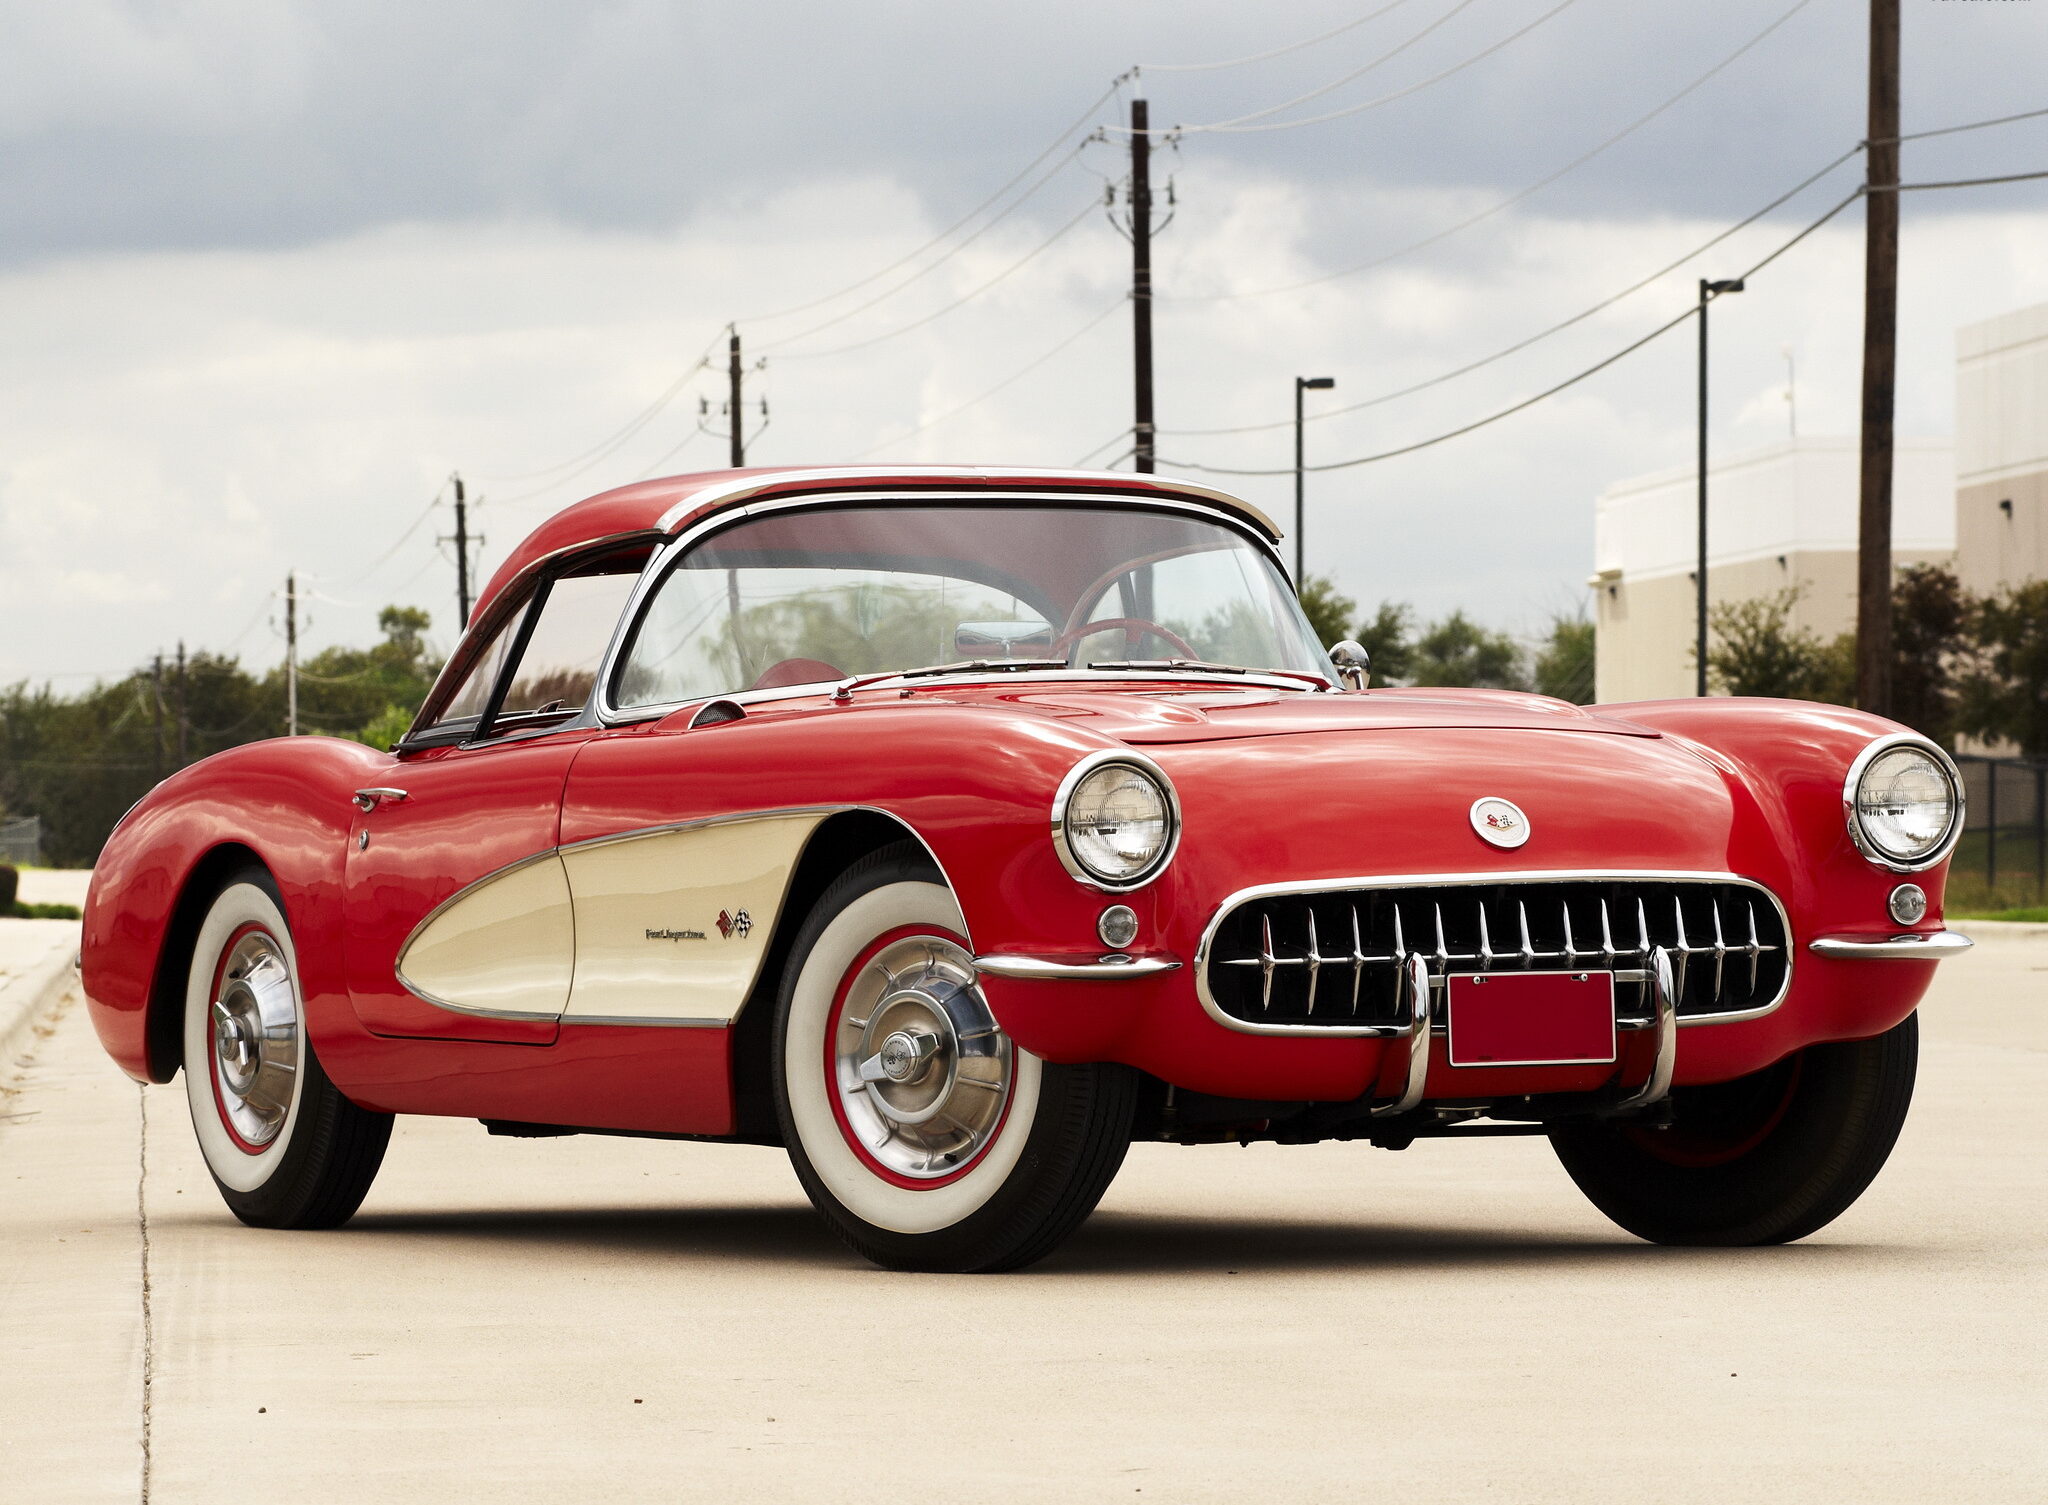 1957 Chevy Corvette 'Fuel-Injected'